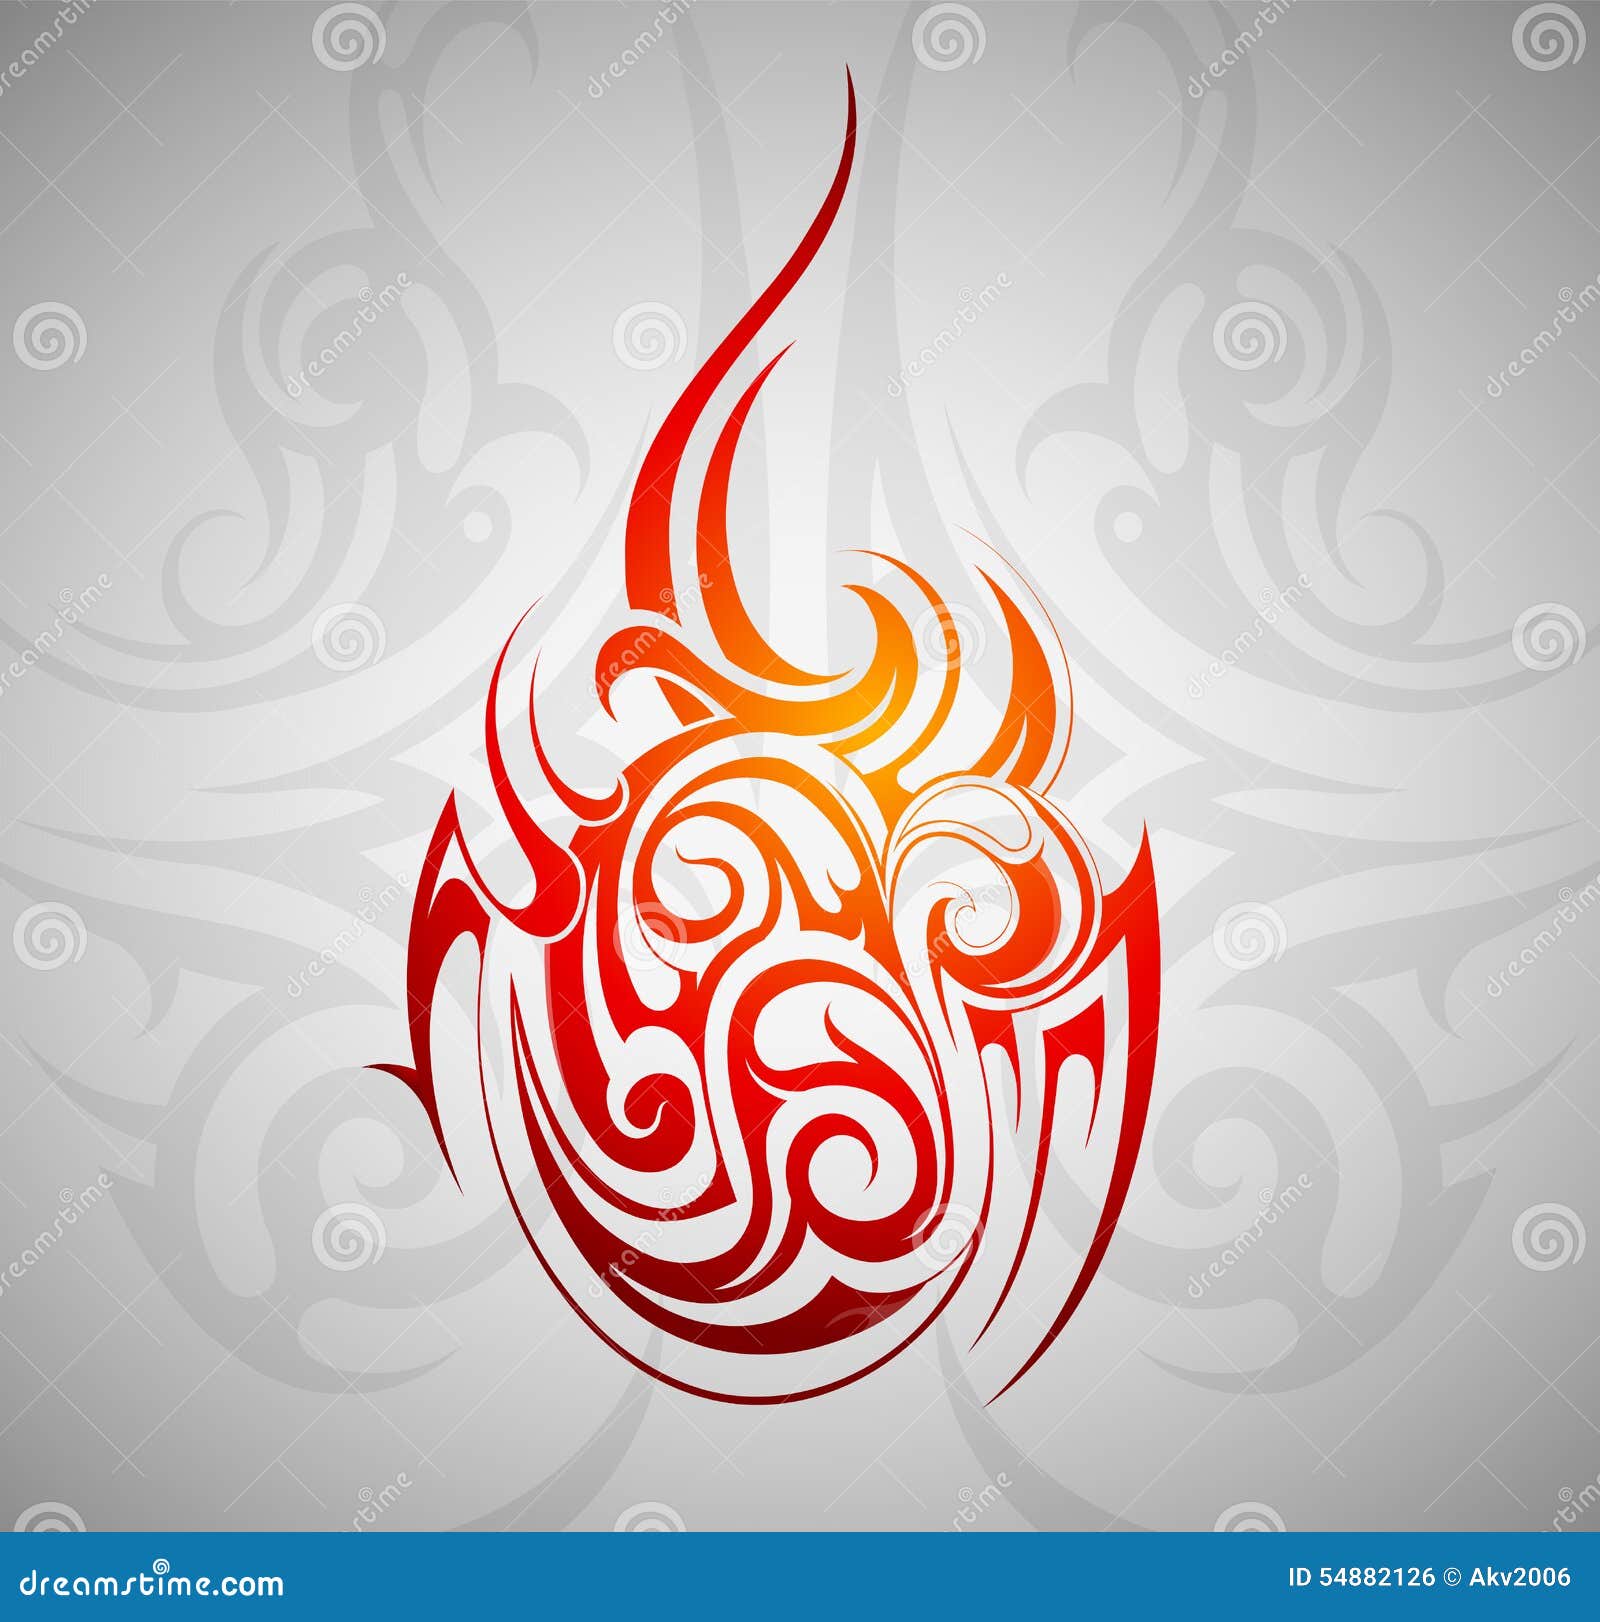 101 Best Fire Flame Tattoo Ideas That Will Blow Your Mind!